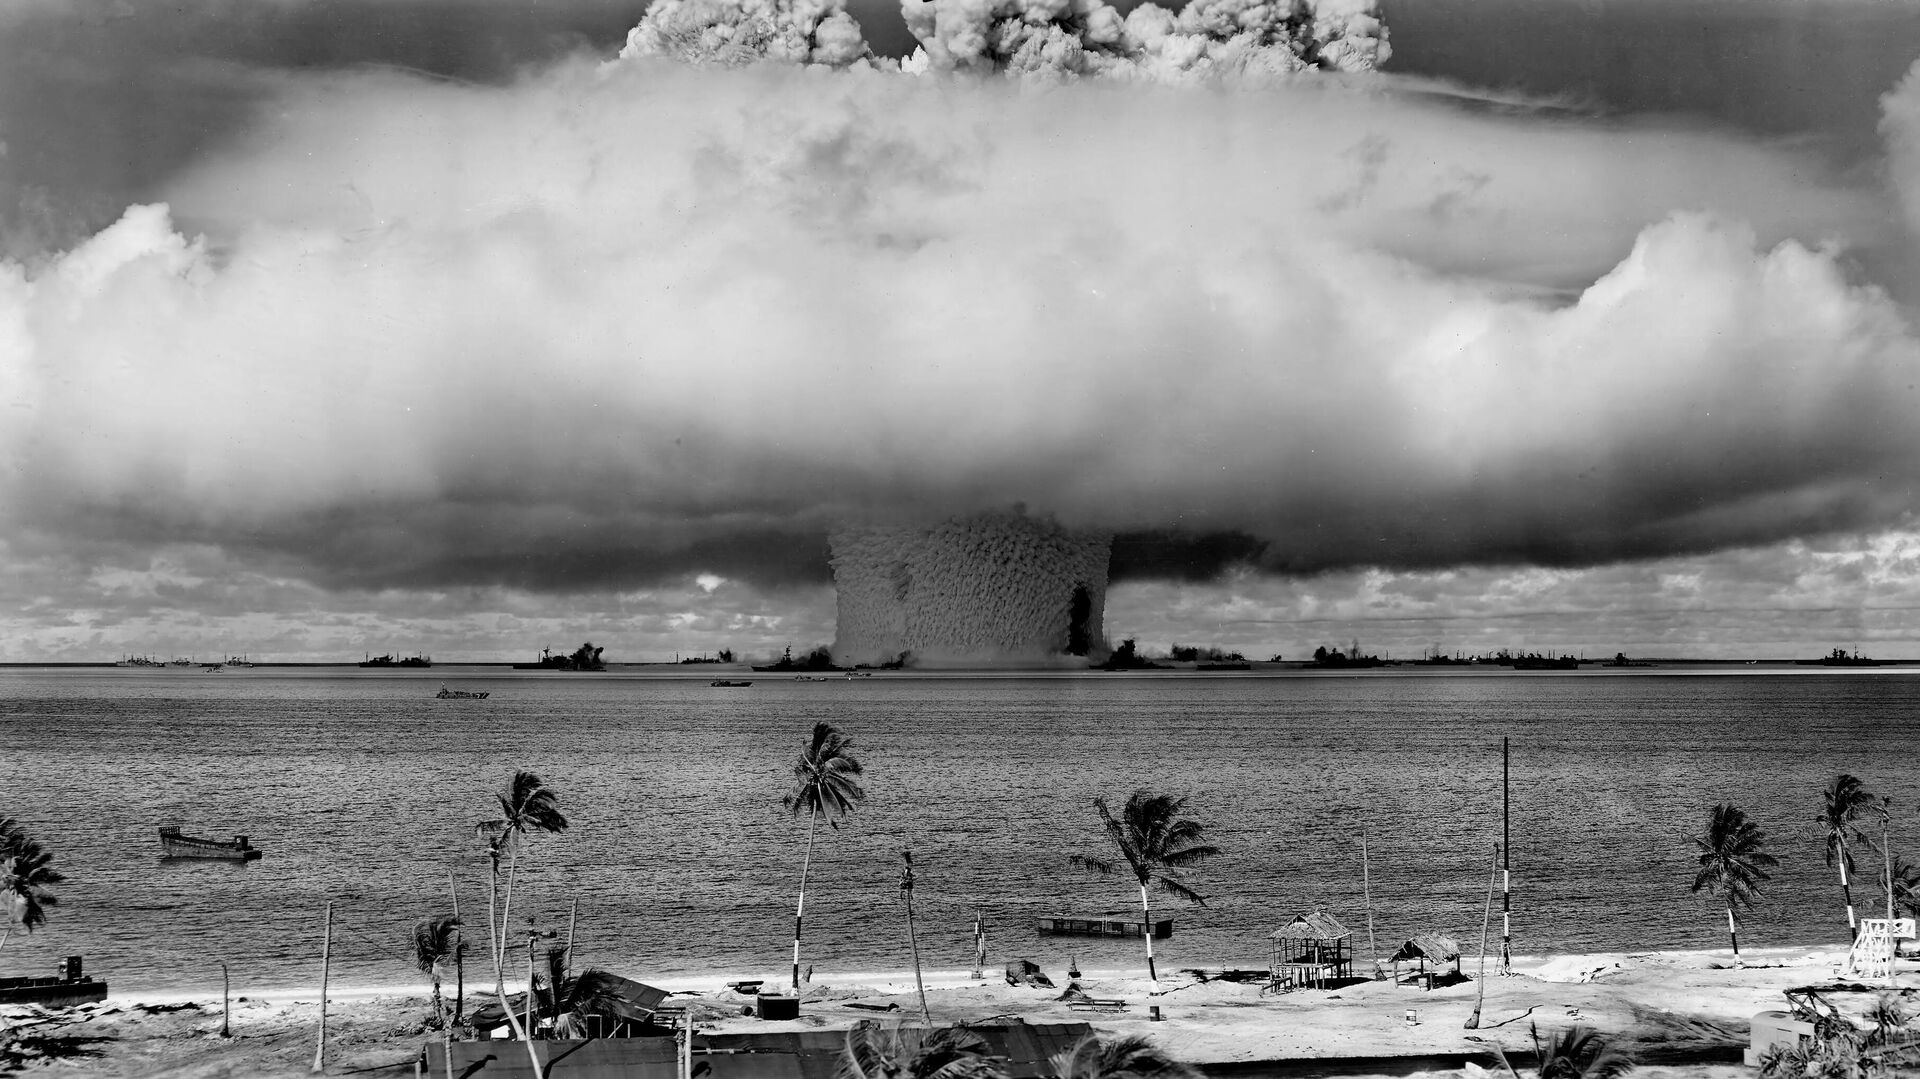 The Baker explosion, part of Operation Crossroads, a nuclear weapon test by the US military at Bikini Atoll, Micronesia, on 25 July 1946. - Sputnik Africa, 1920, 25.10.2023